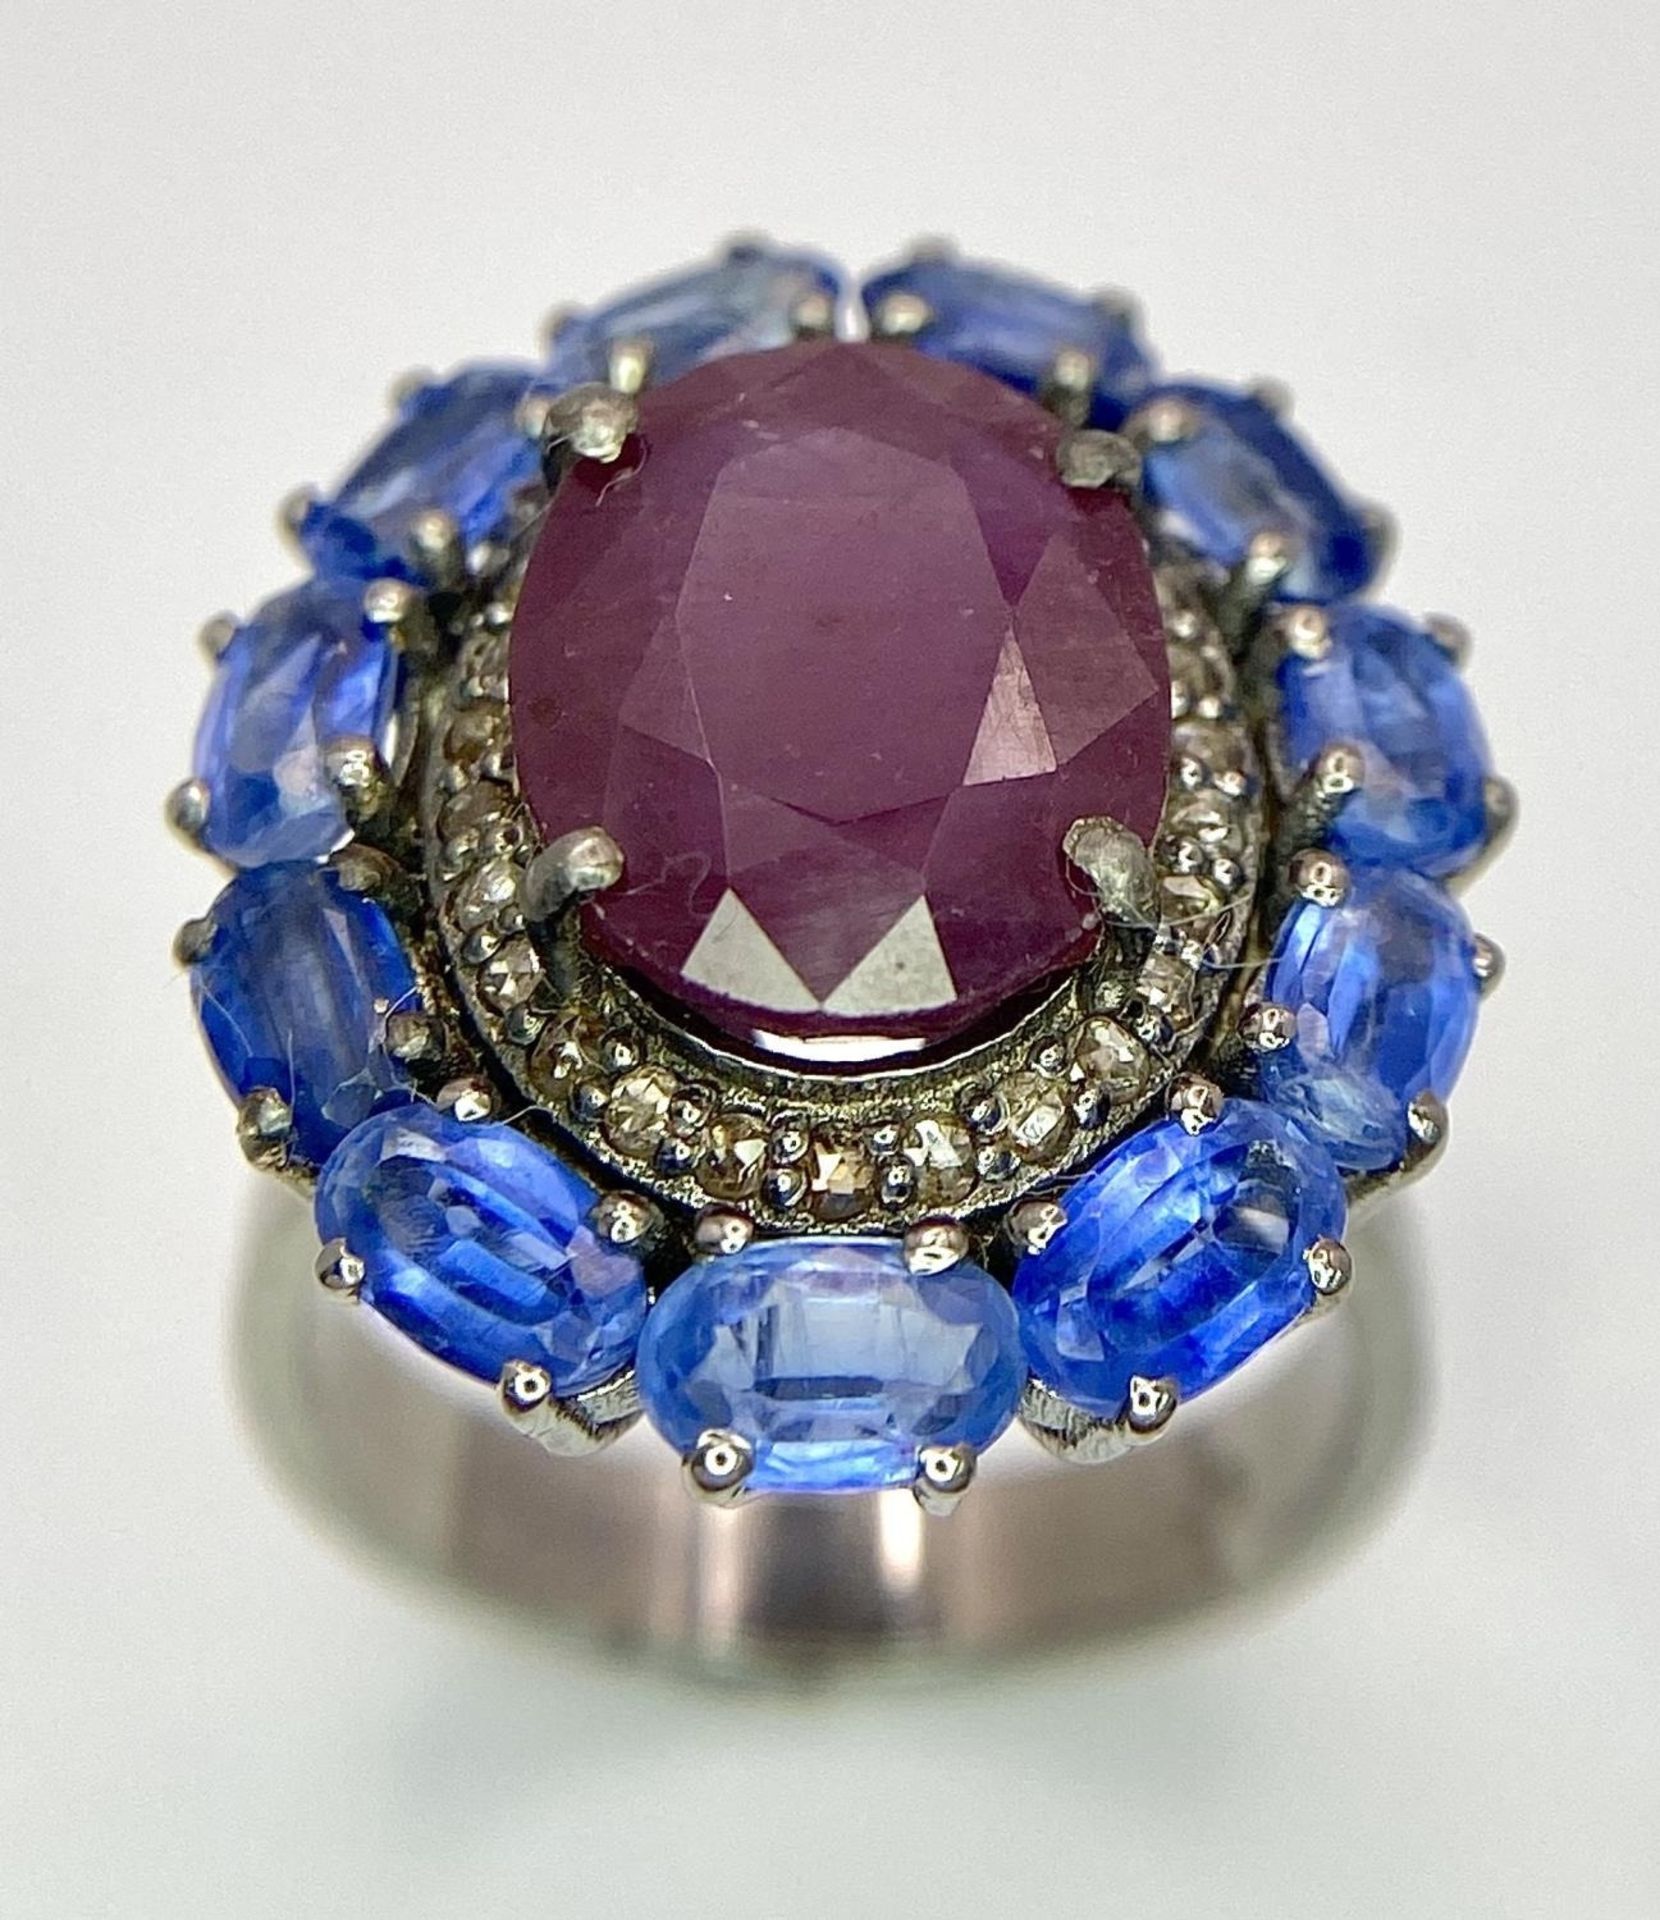 A 5.65ct Ruby Dress Ring with Halo of 0.40ctw of Diamonds and 3.70ct of Kyanite Stones. Set in 925